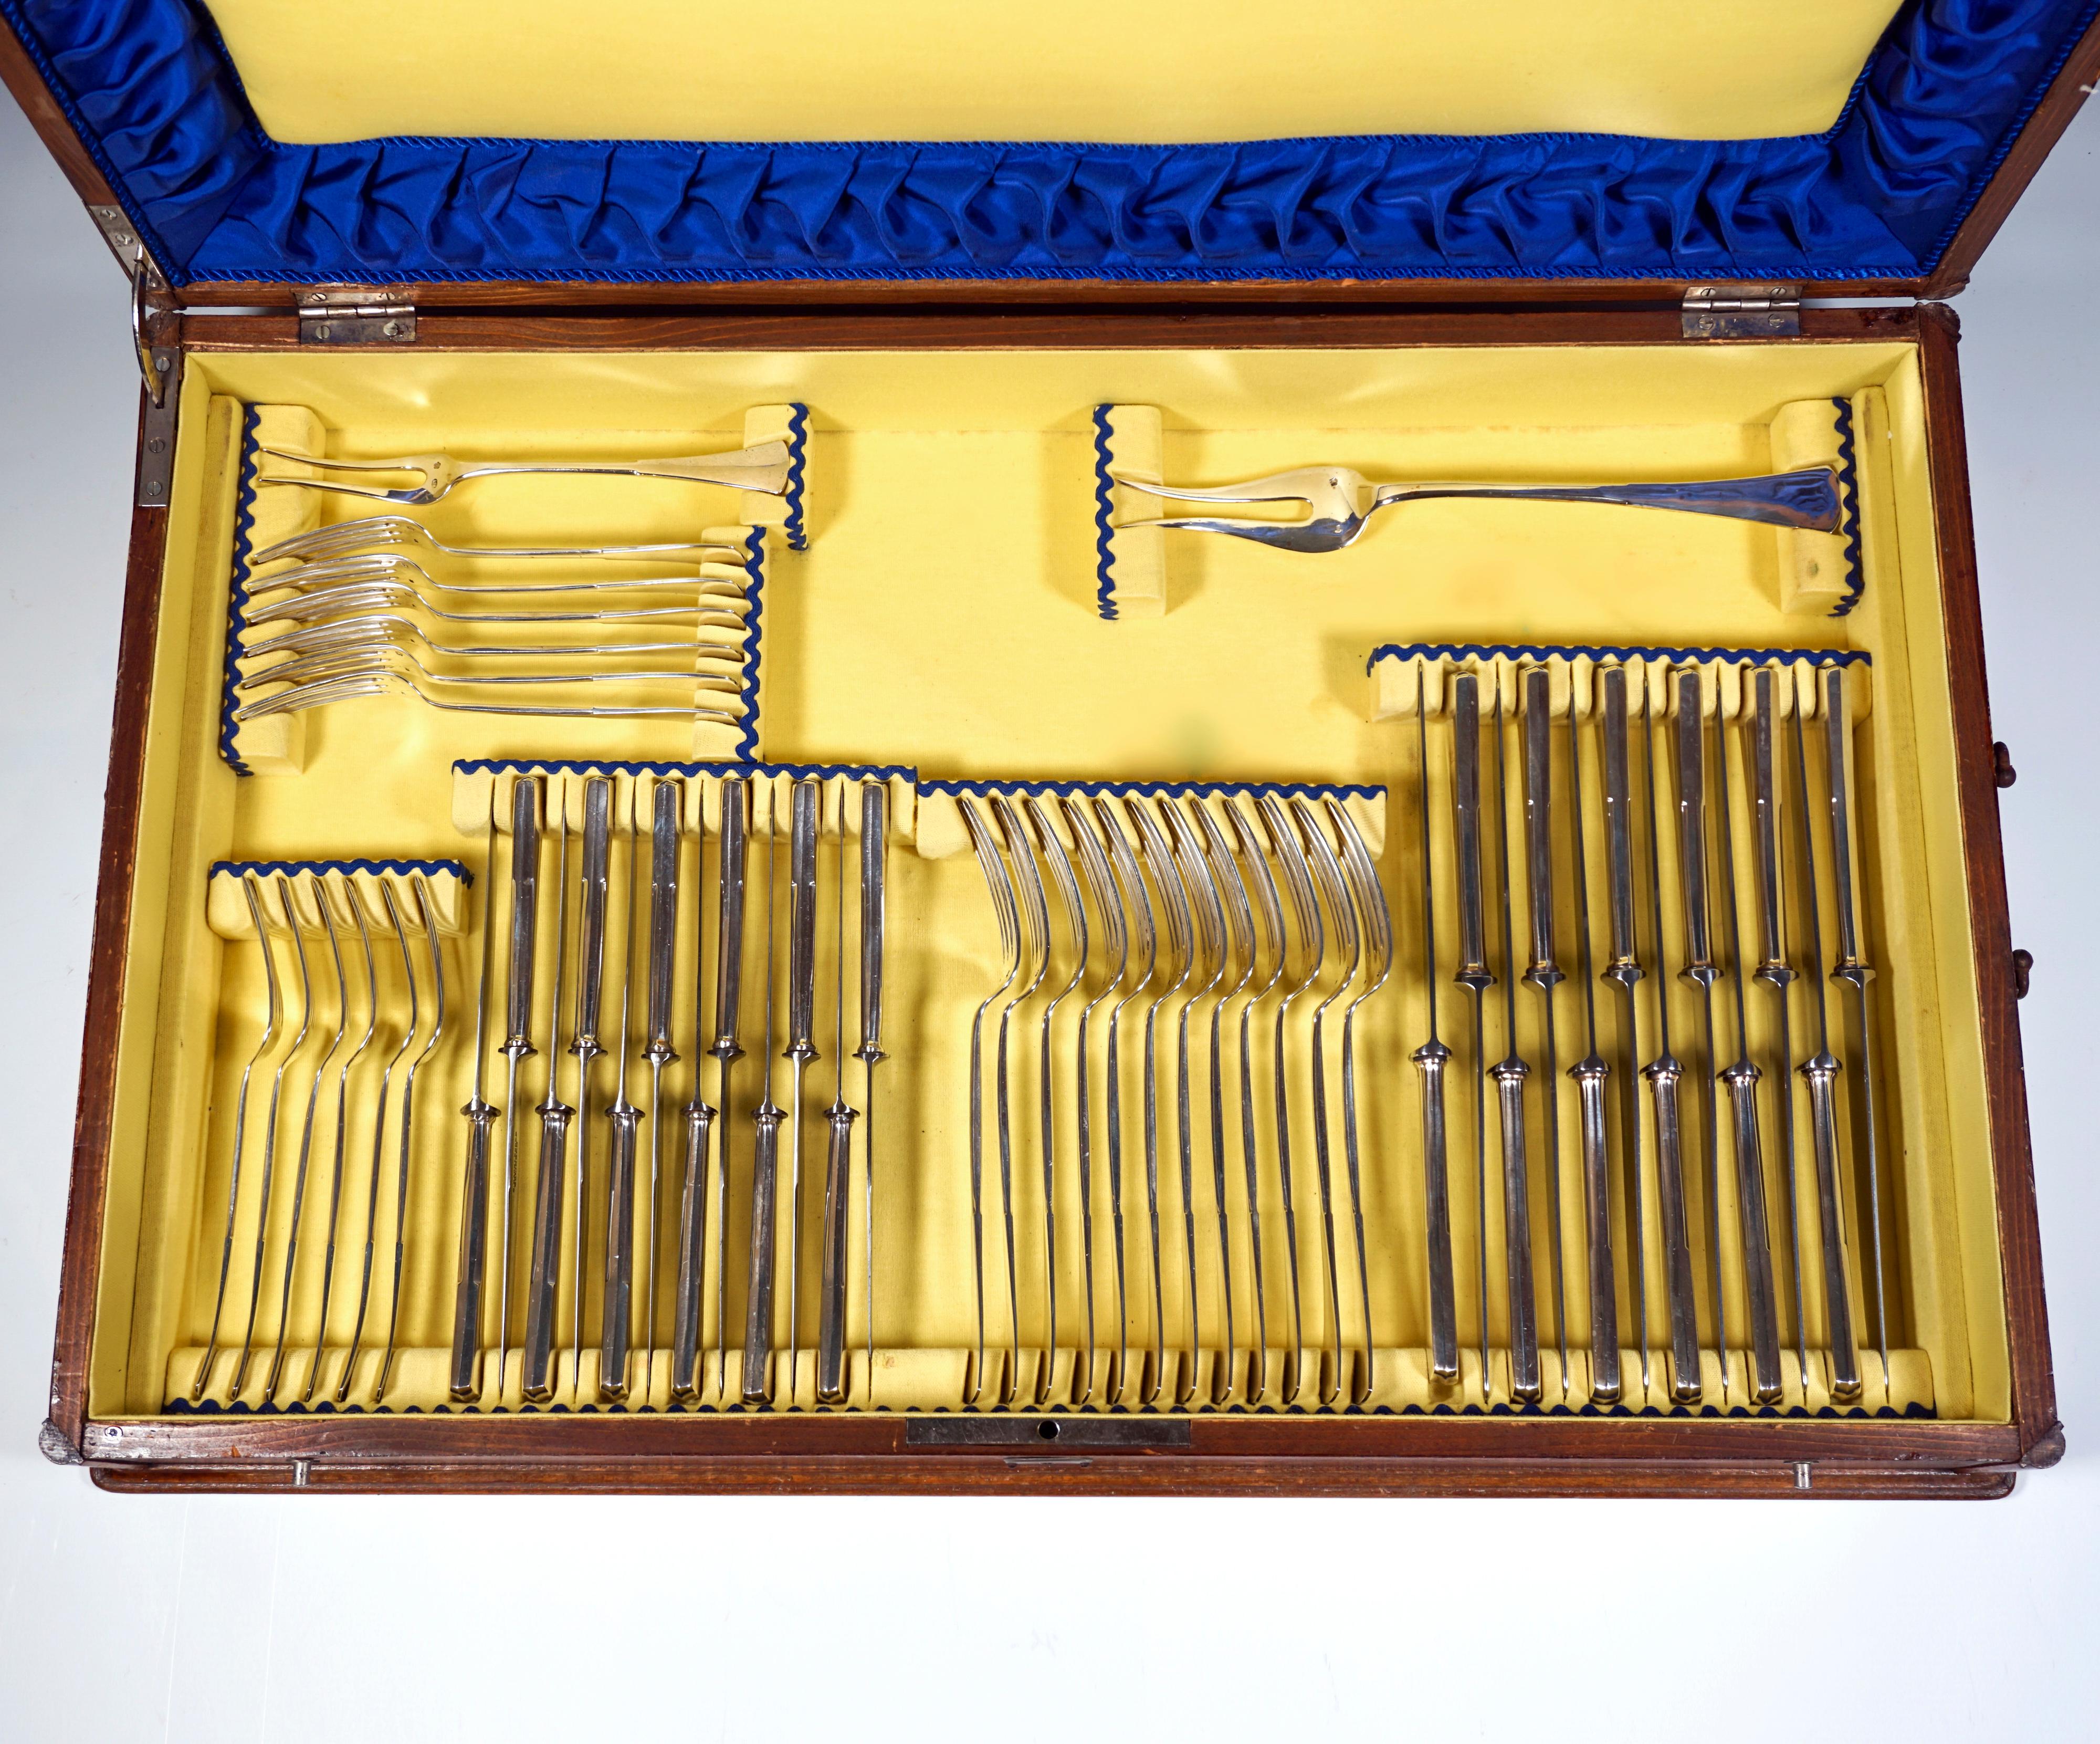 Art Nouveau Silver Cutlery Set For 12 People In Original Case, Austria-Hungary In Good Condition For Sale In Vienna, AT